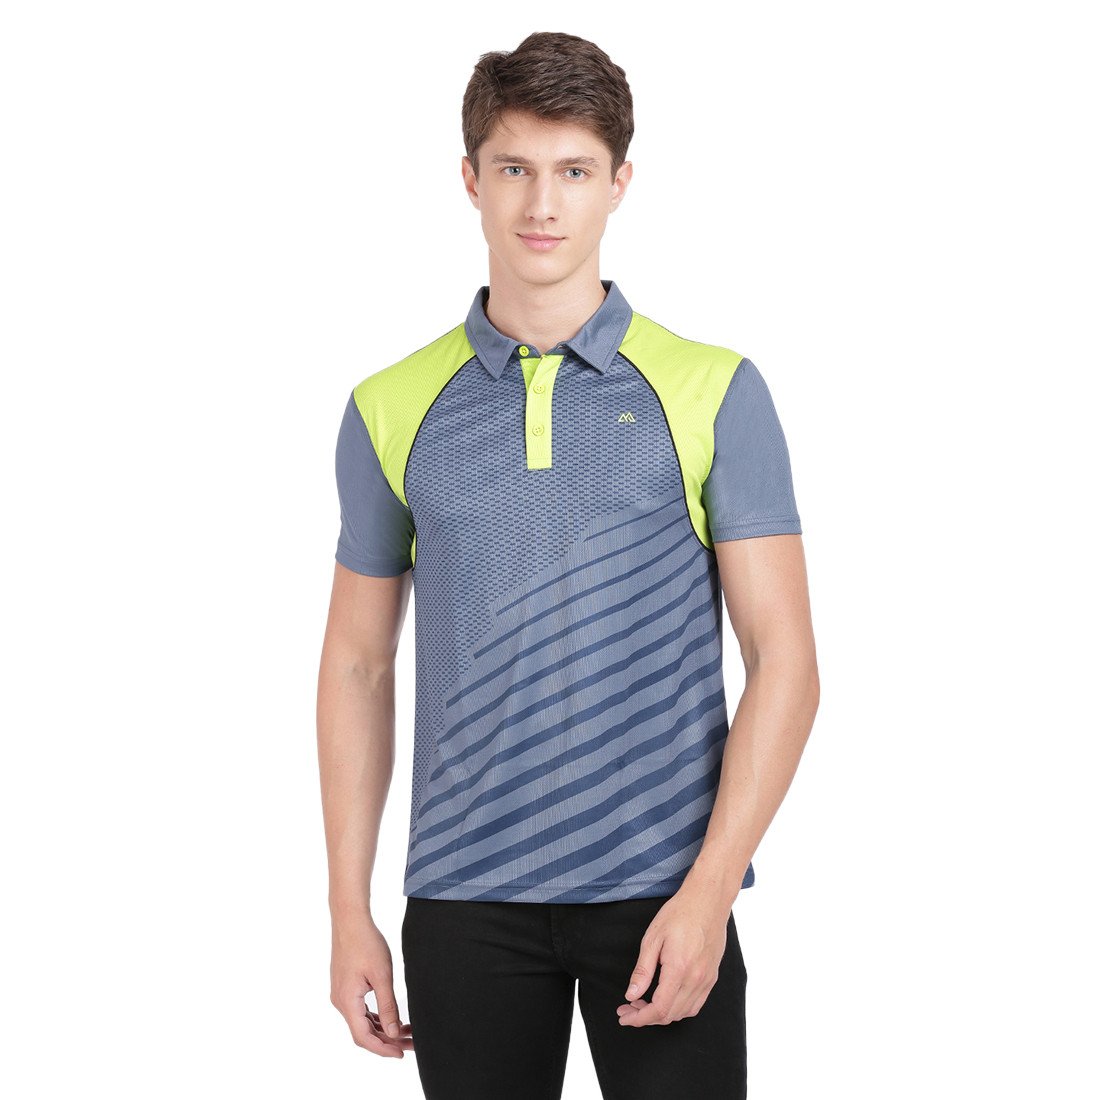 Bleualps Active Mens Printed Polo T Shirt With Cut Panels Nt Fluorescent Colour | Sports T-Shirt | Workout T-Shirt